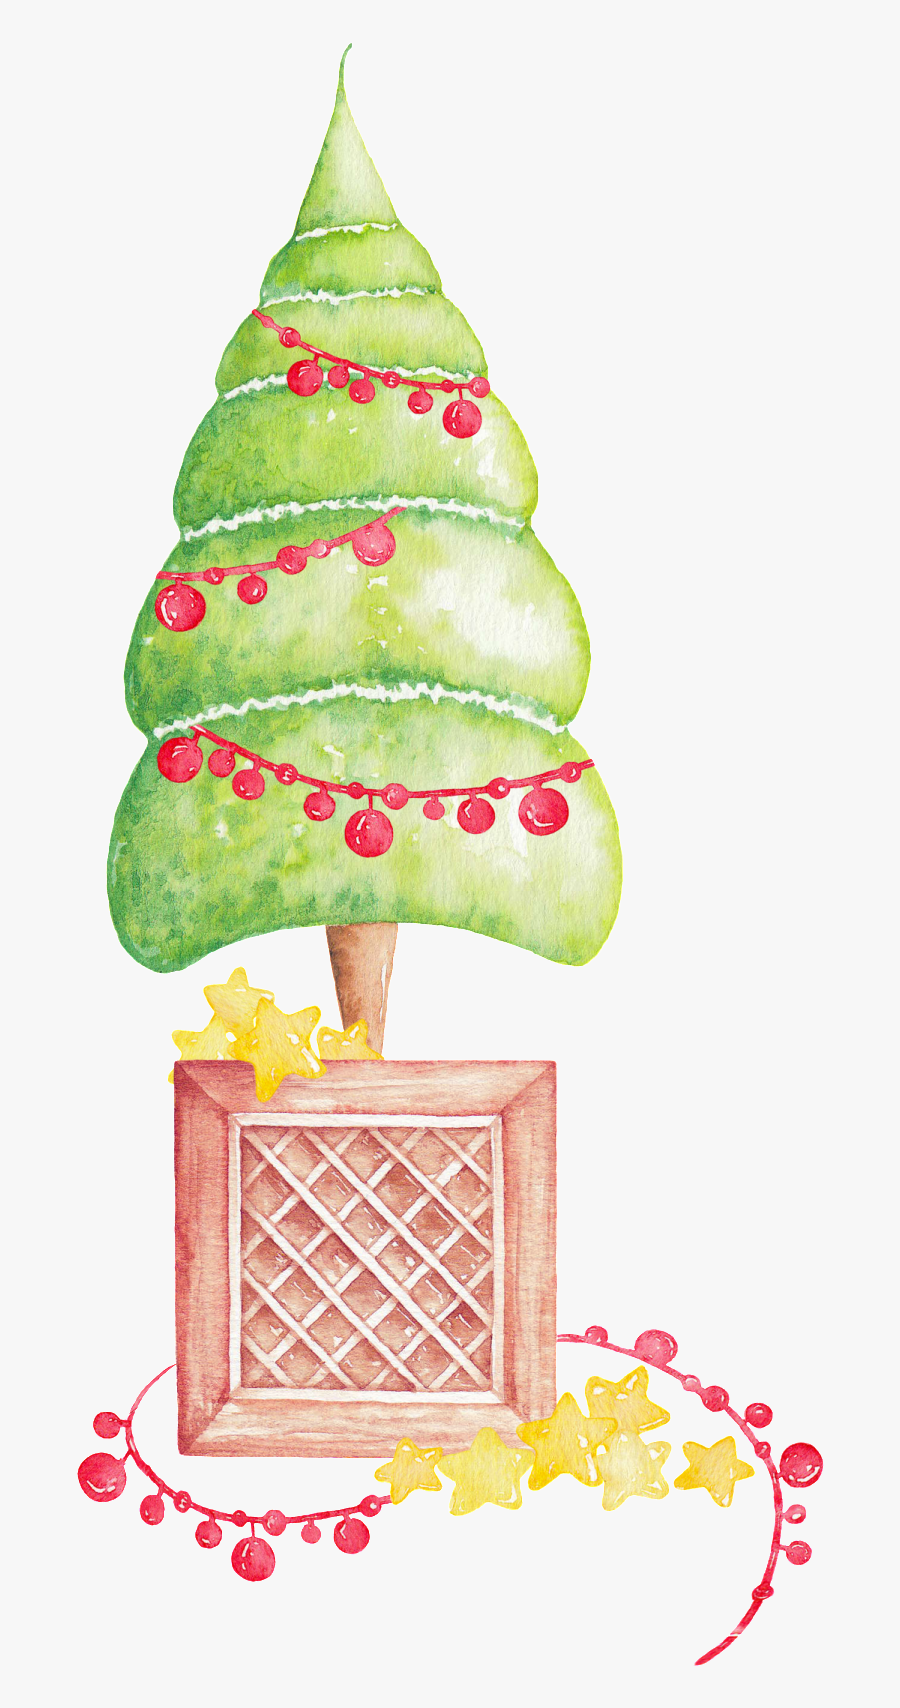 Hand Painted Cute Abstract Christmas Tree Png Transparent - Christmas Tree, Transparent Clipart